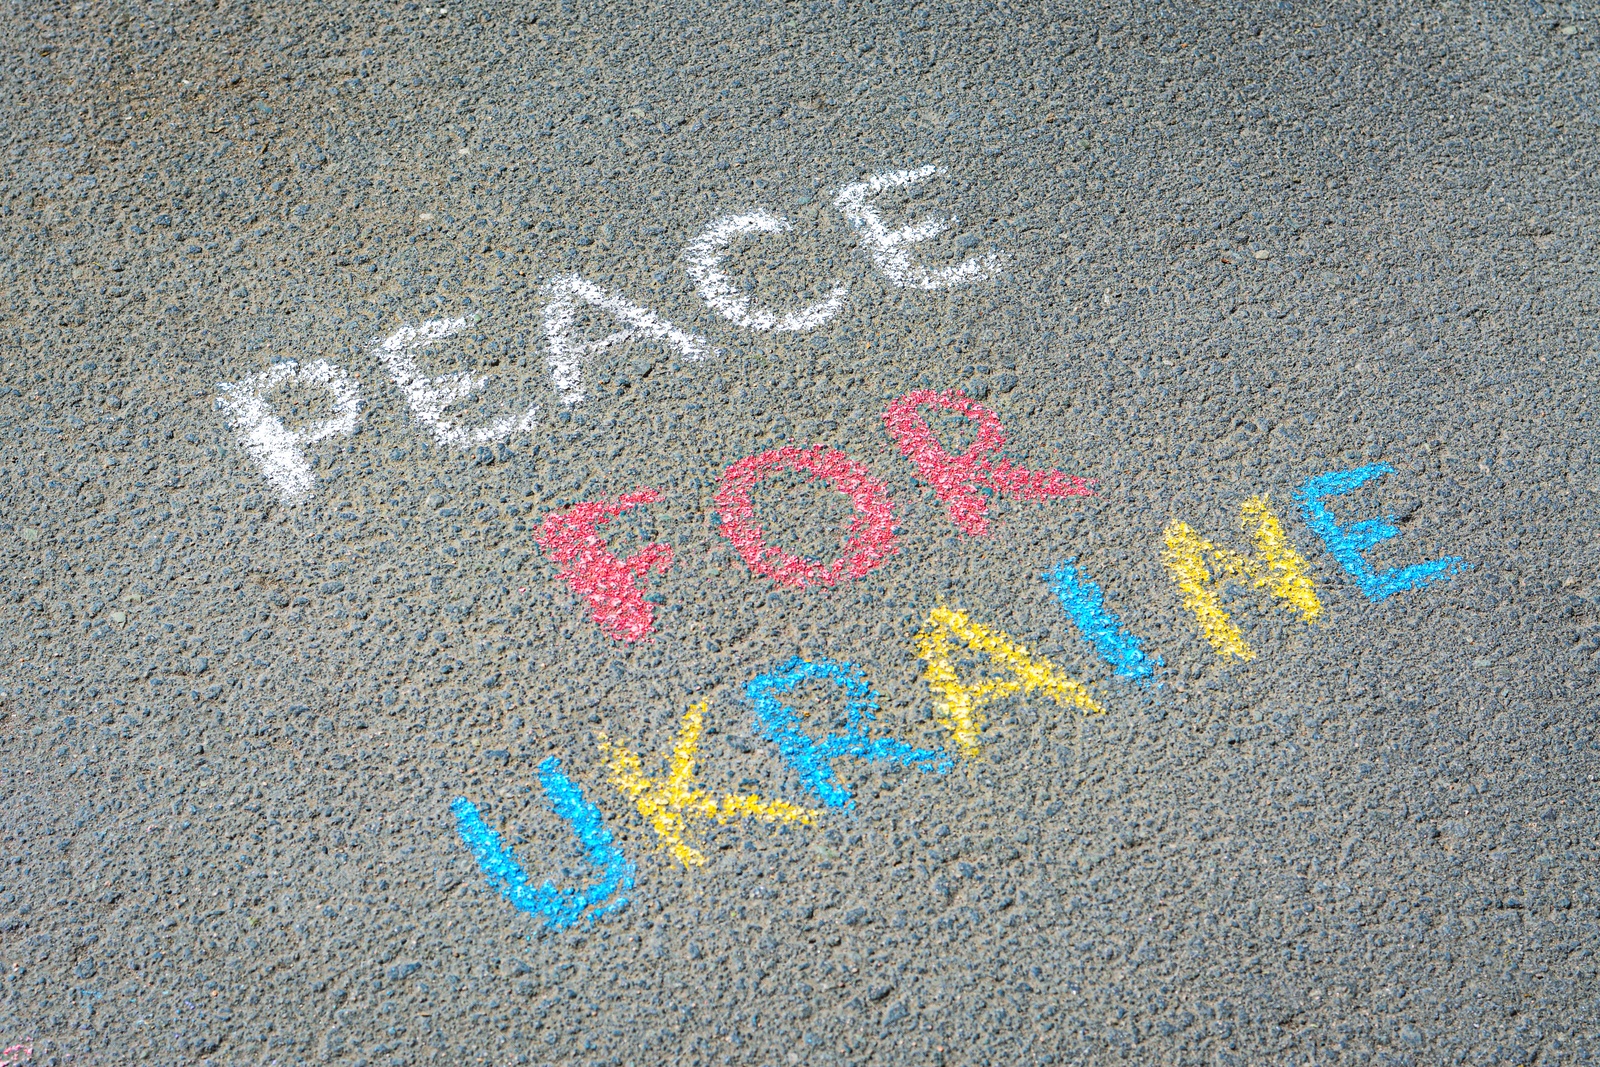 Photo of Words Peace For Ukraine written with colorful chalks on asphalt outdoors